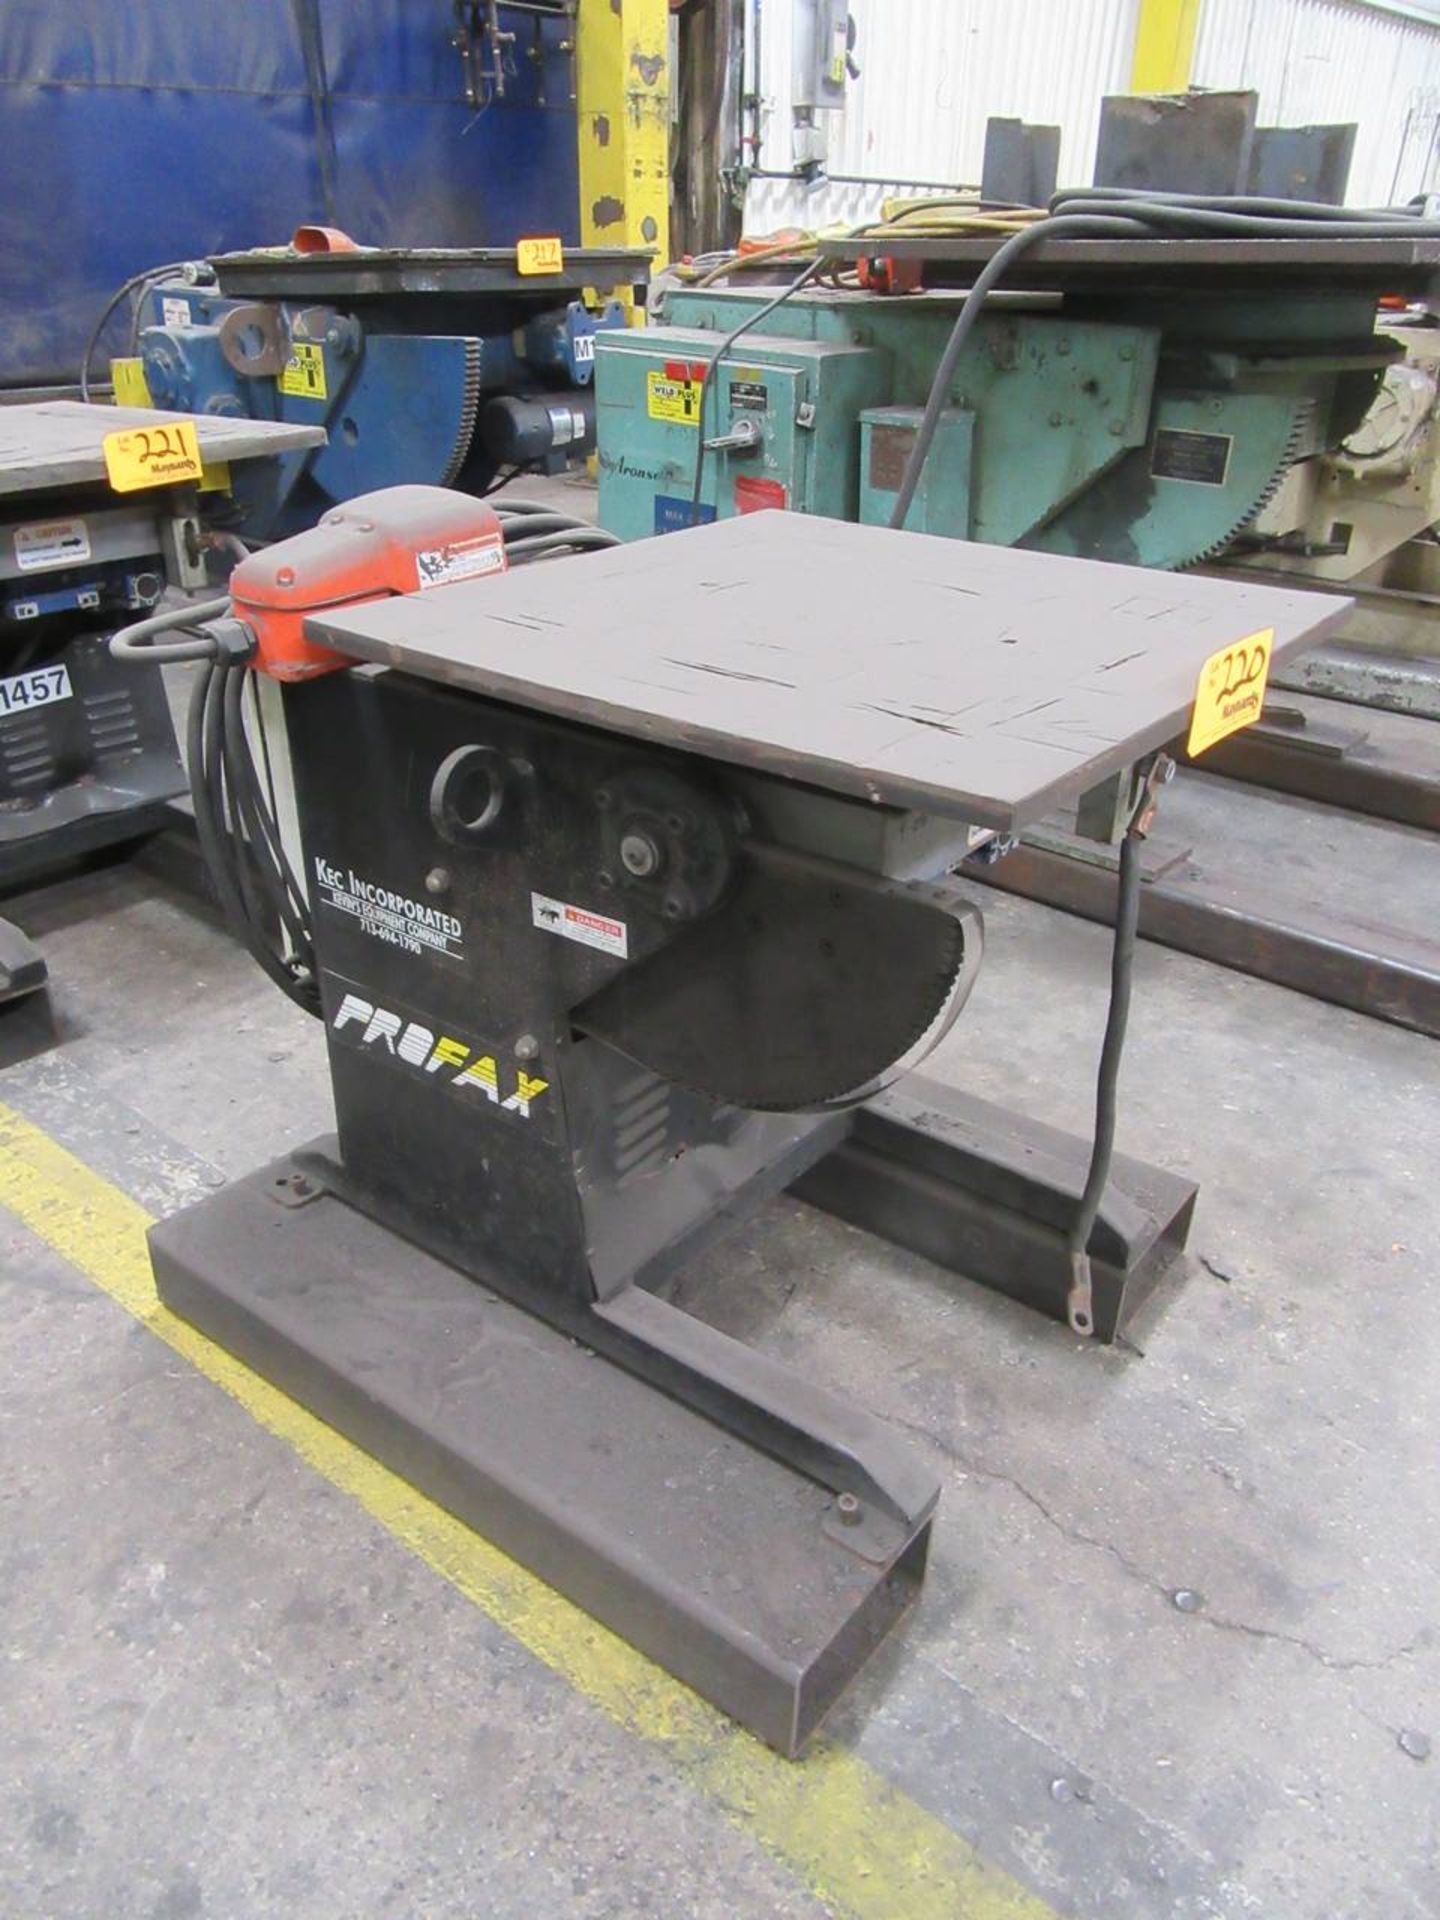 2015 Profax WP-500 Welding Positioner - Image 2 of 4